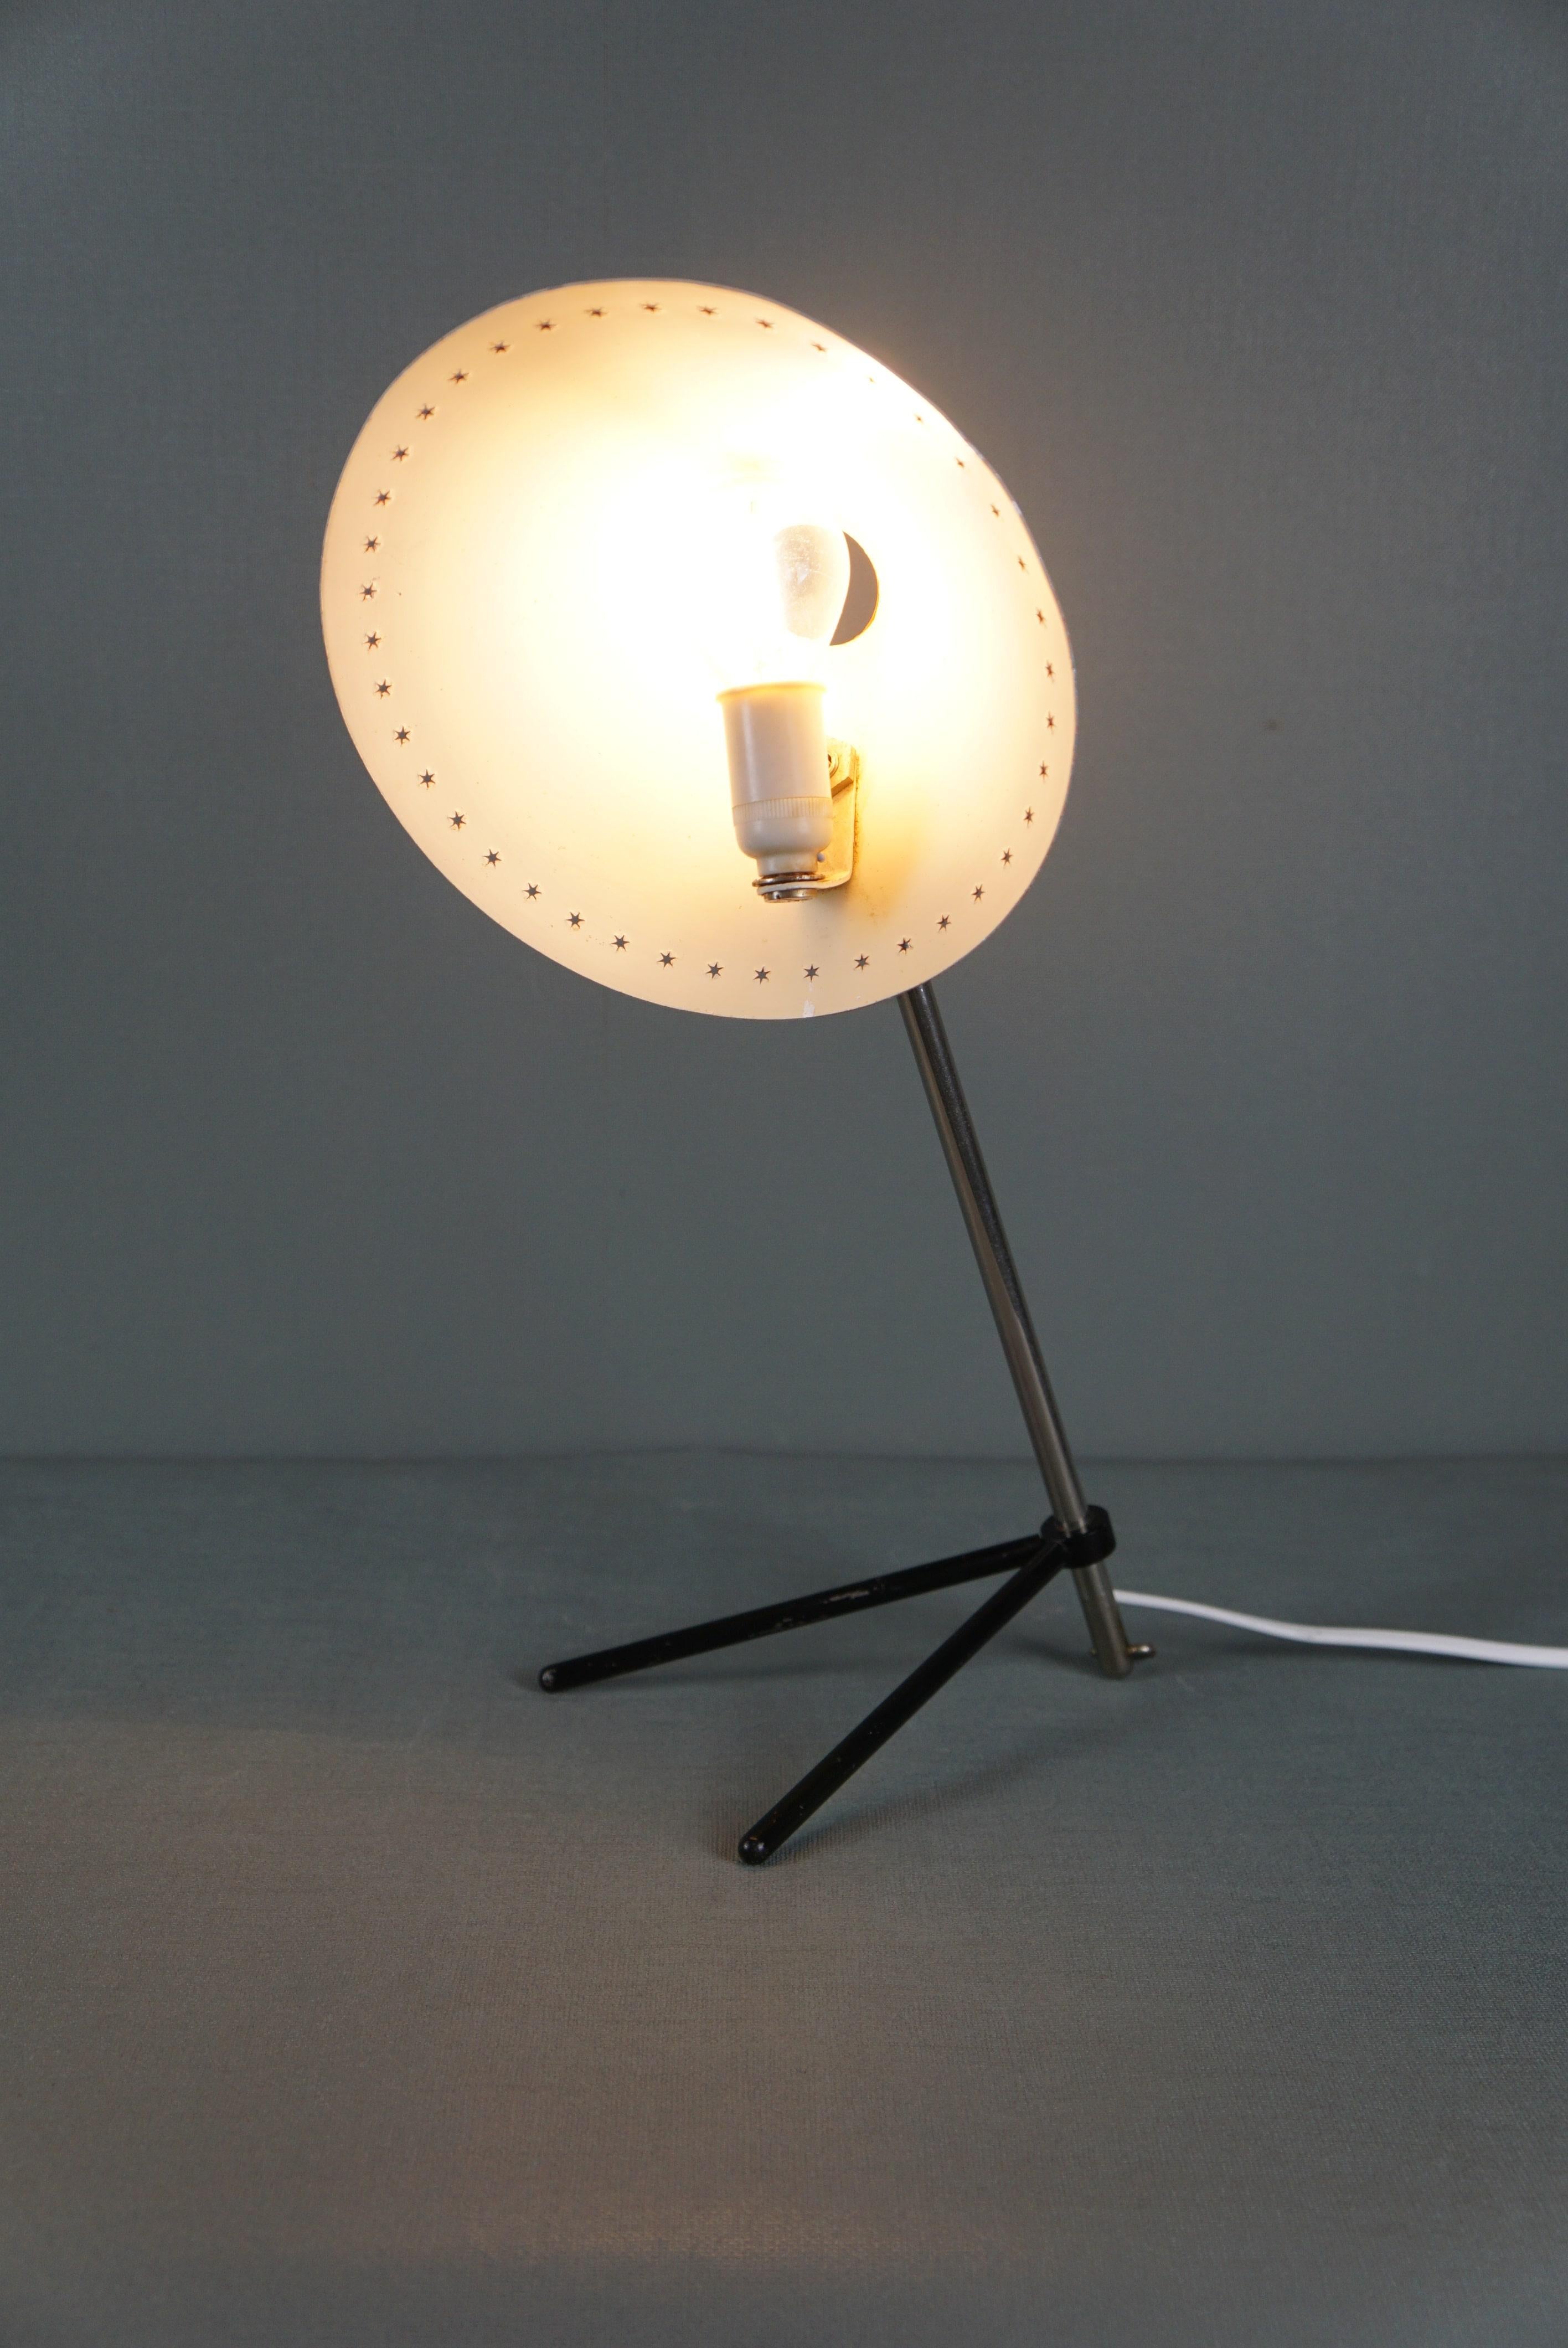 Offered is this designer table lamp with adjustable leg.

This desk or table lamp is one to have in your home because it has a simple design that is still striking. This is, for example, due to the red hood and the black simple leg. The lamp can be